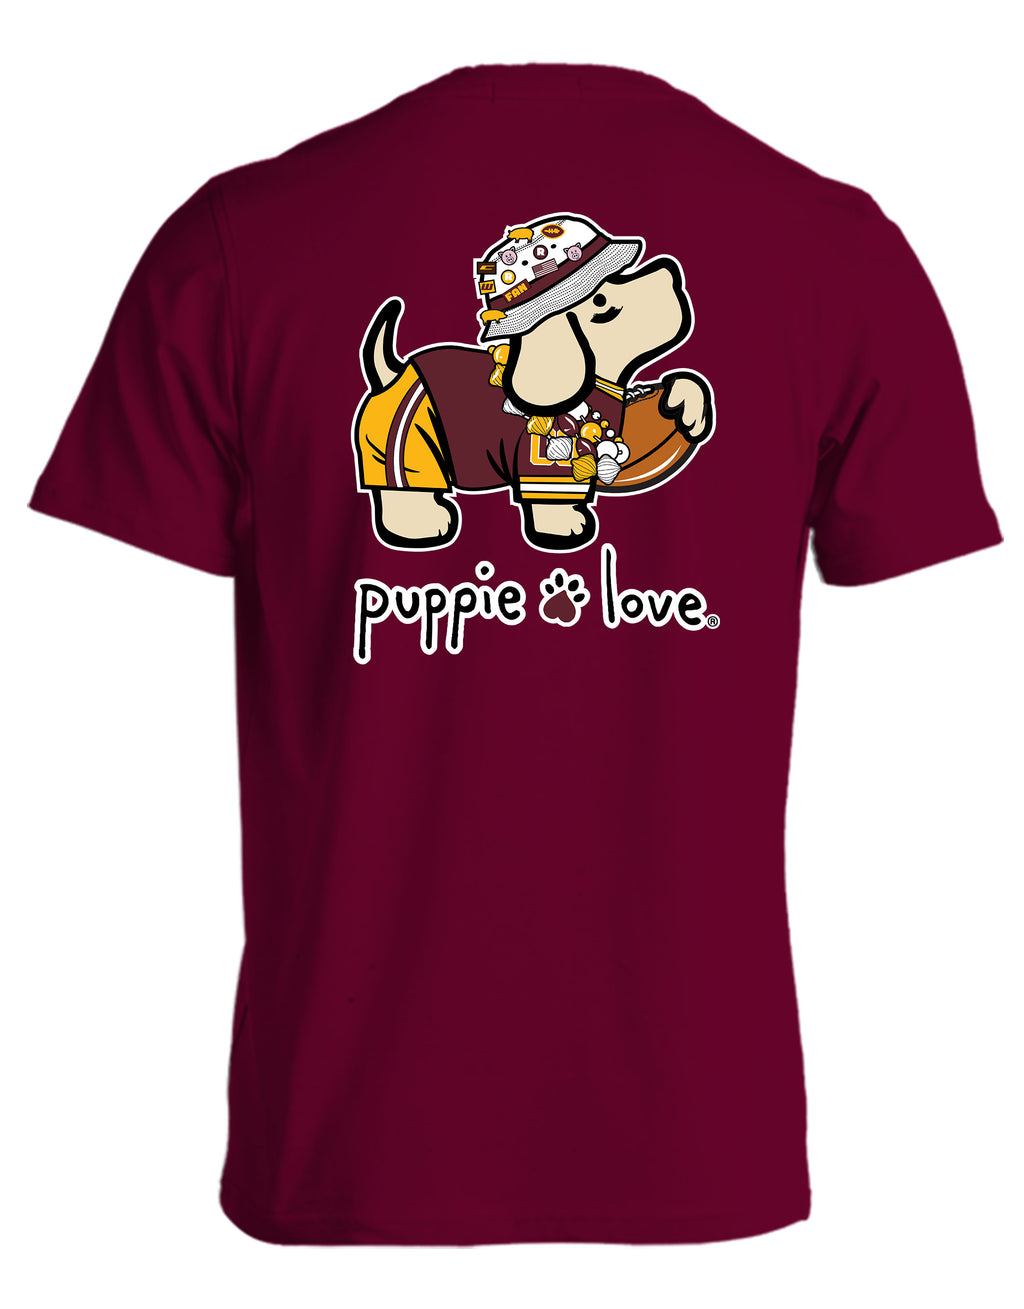 BURGUNDY AND GOLD MASCOT PUP - Puppie Love